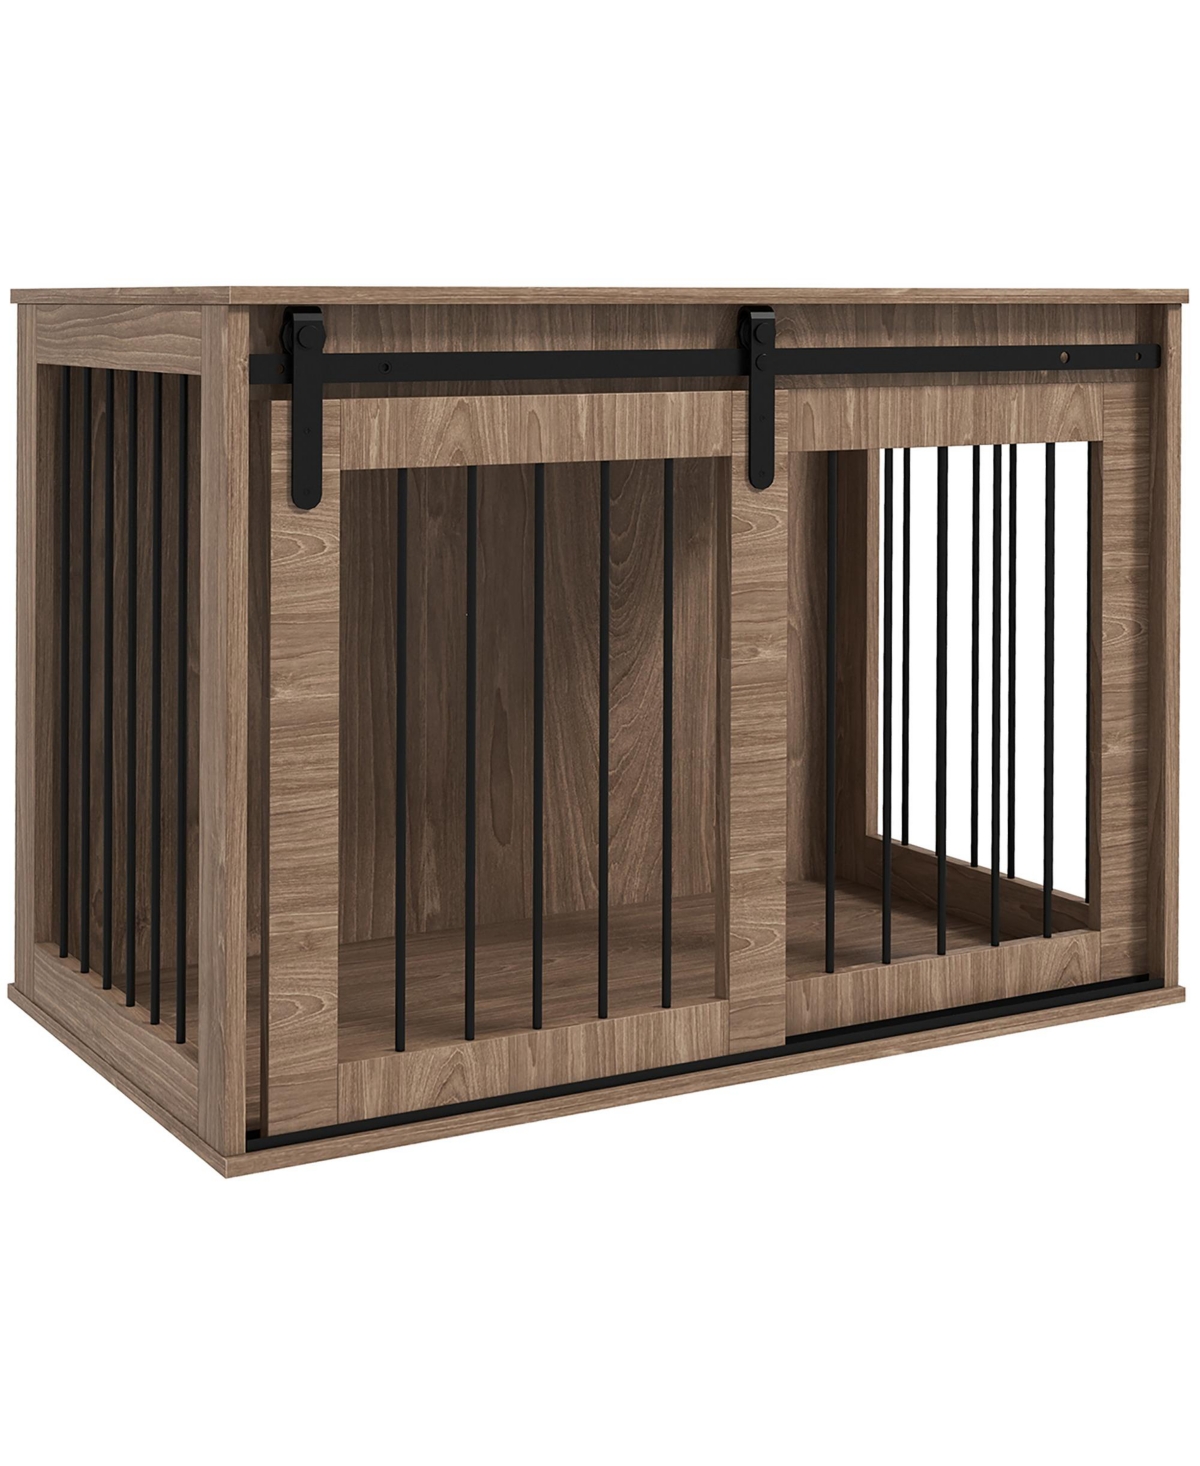 Dog Crate Furniture for Large Sized Dog, 39" x 23" x 24", Brown - Brown